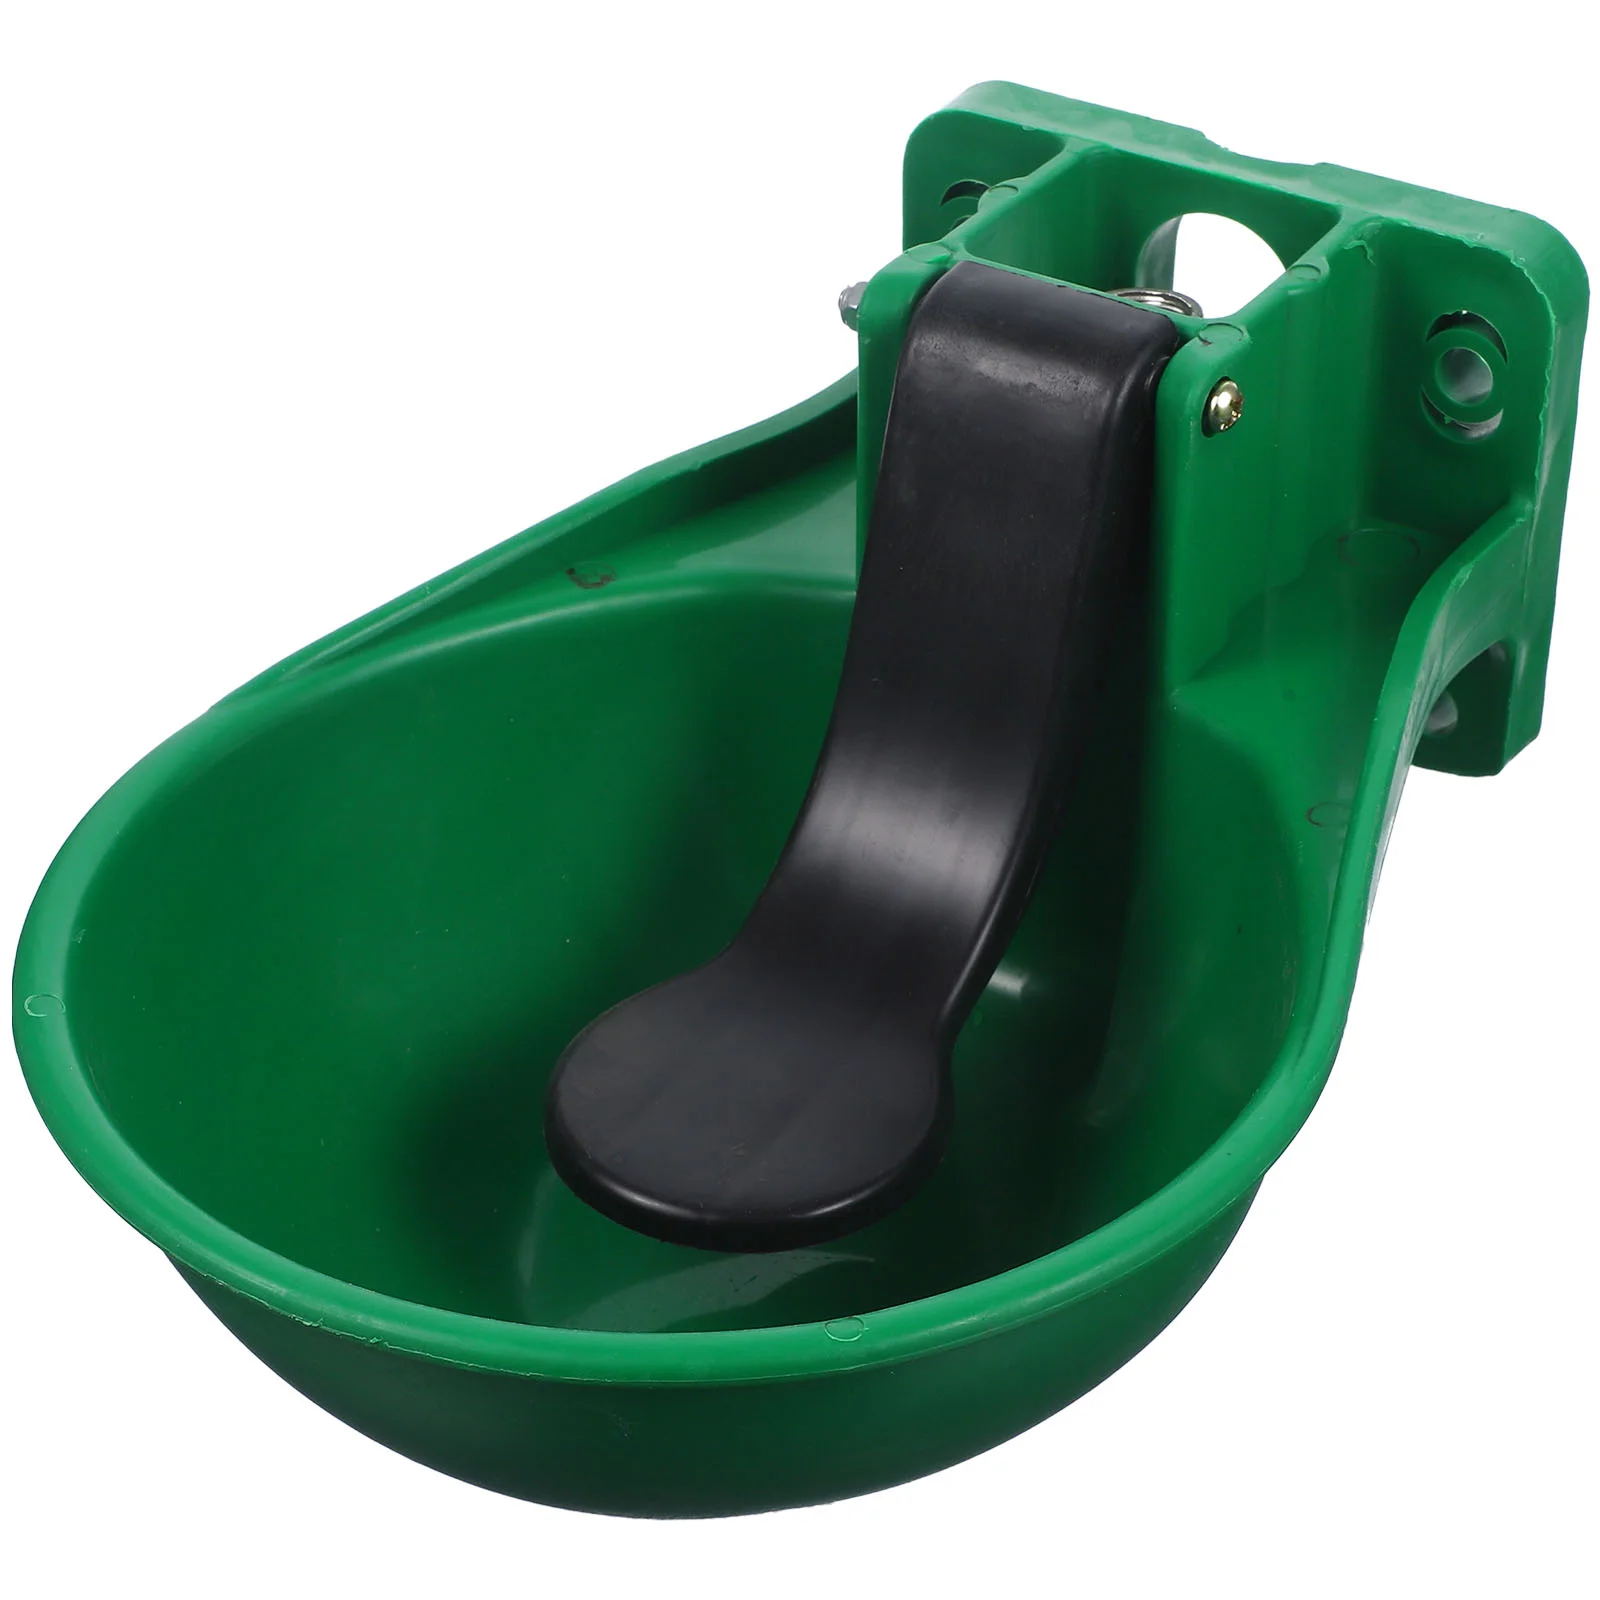 

Water Livestock Automatic Bowl Drinking Waterer Trough Feeder Cattle Cow Sheep Drinker Dog Horse Tool Fountain Goat Animal